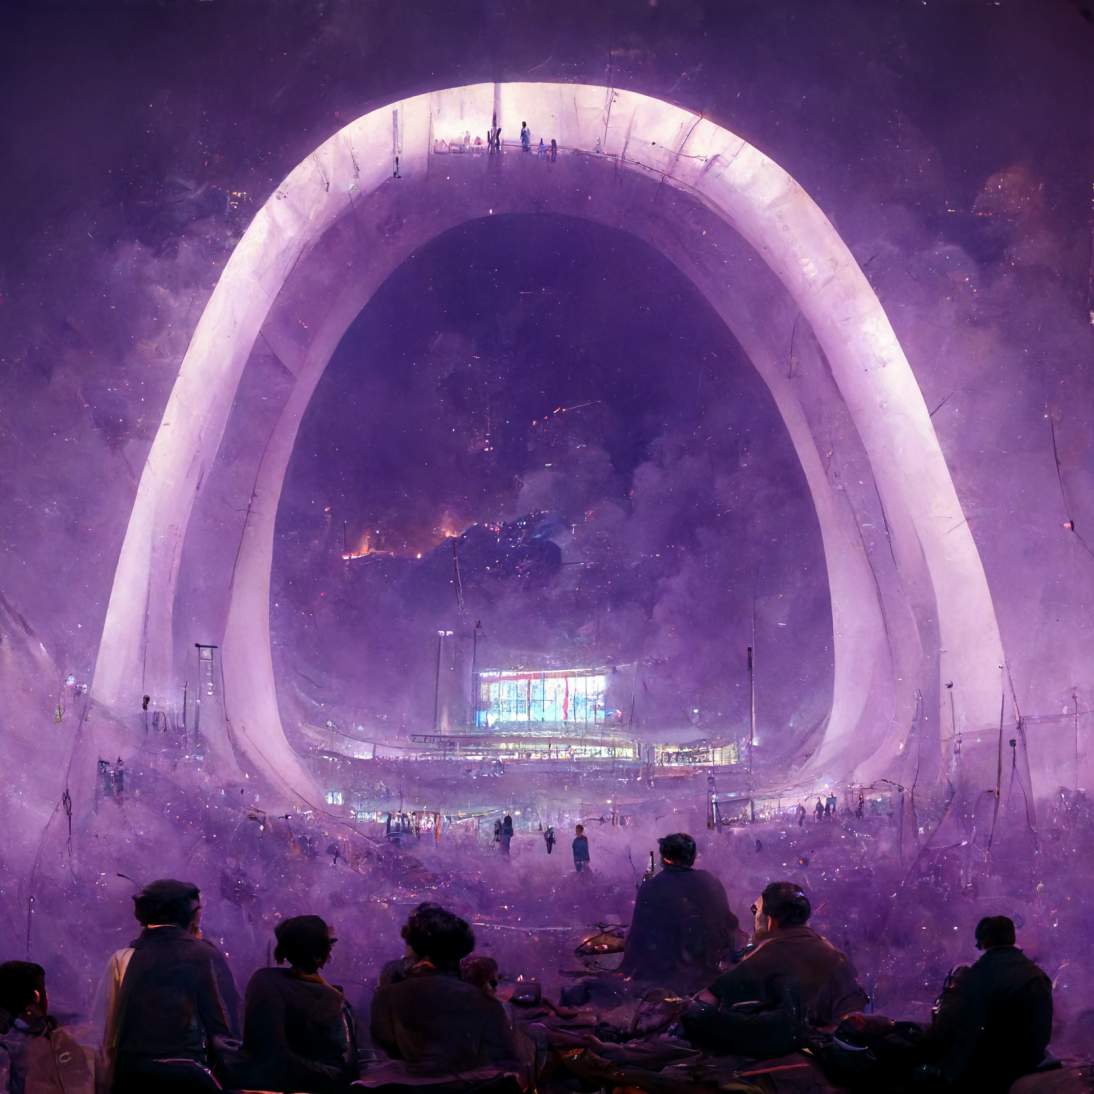 lil_vas_an_ellipse_stadium_detailed_purple_smoke_crowded_with_p.png